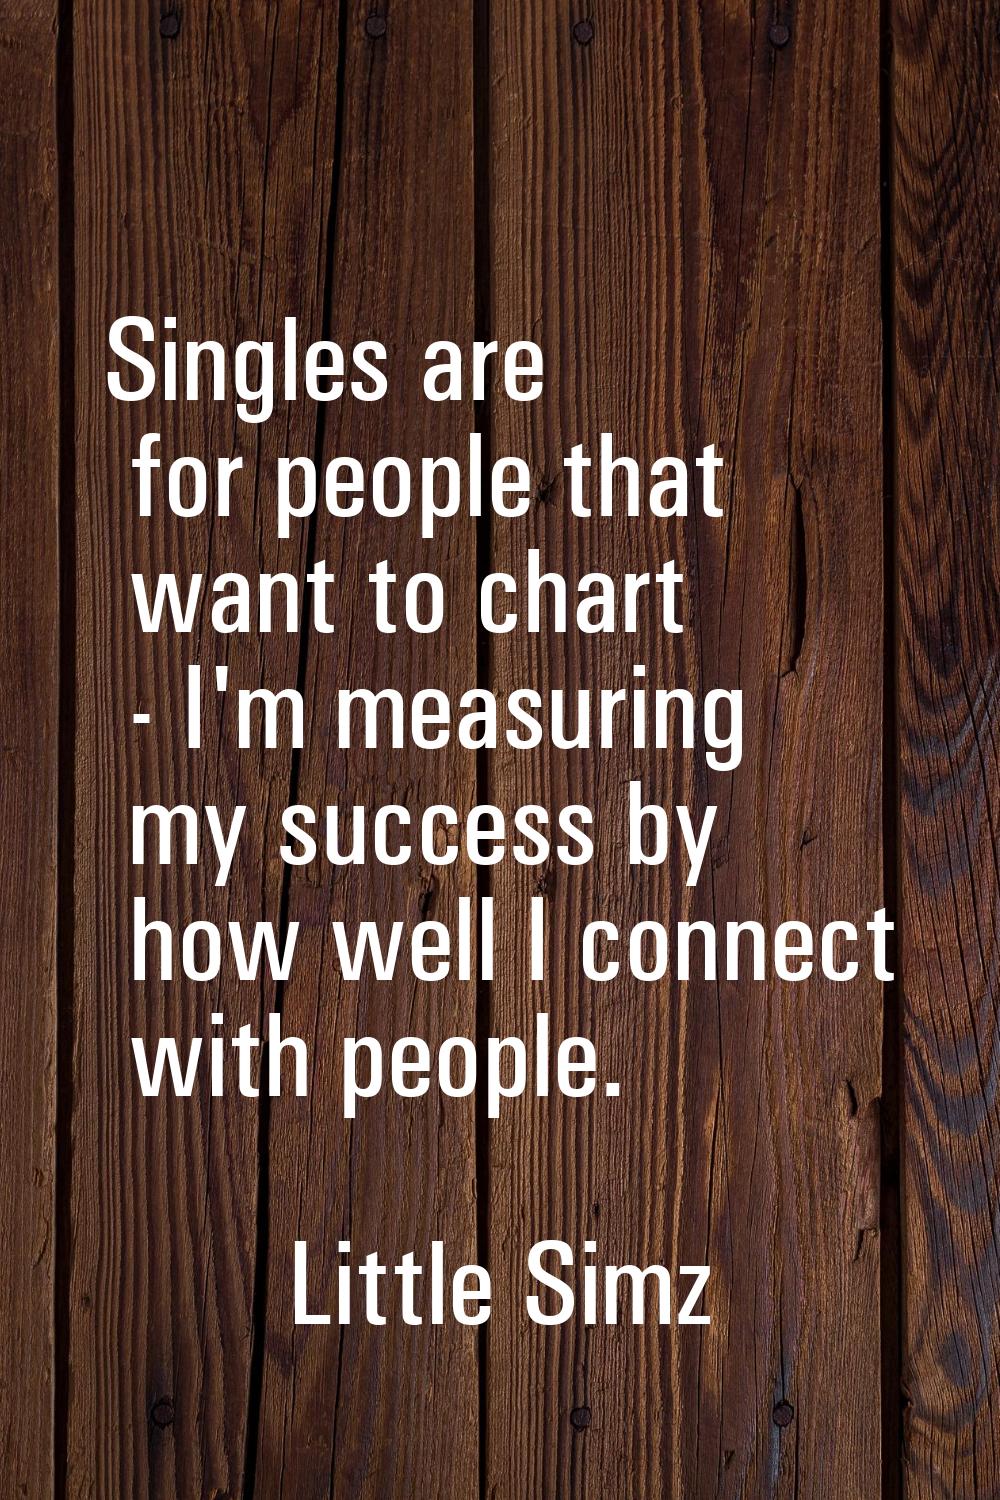 Singles are for people that want to chart - I'm measuring my success by how well I connect with peo